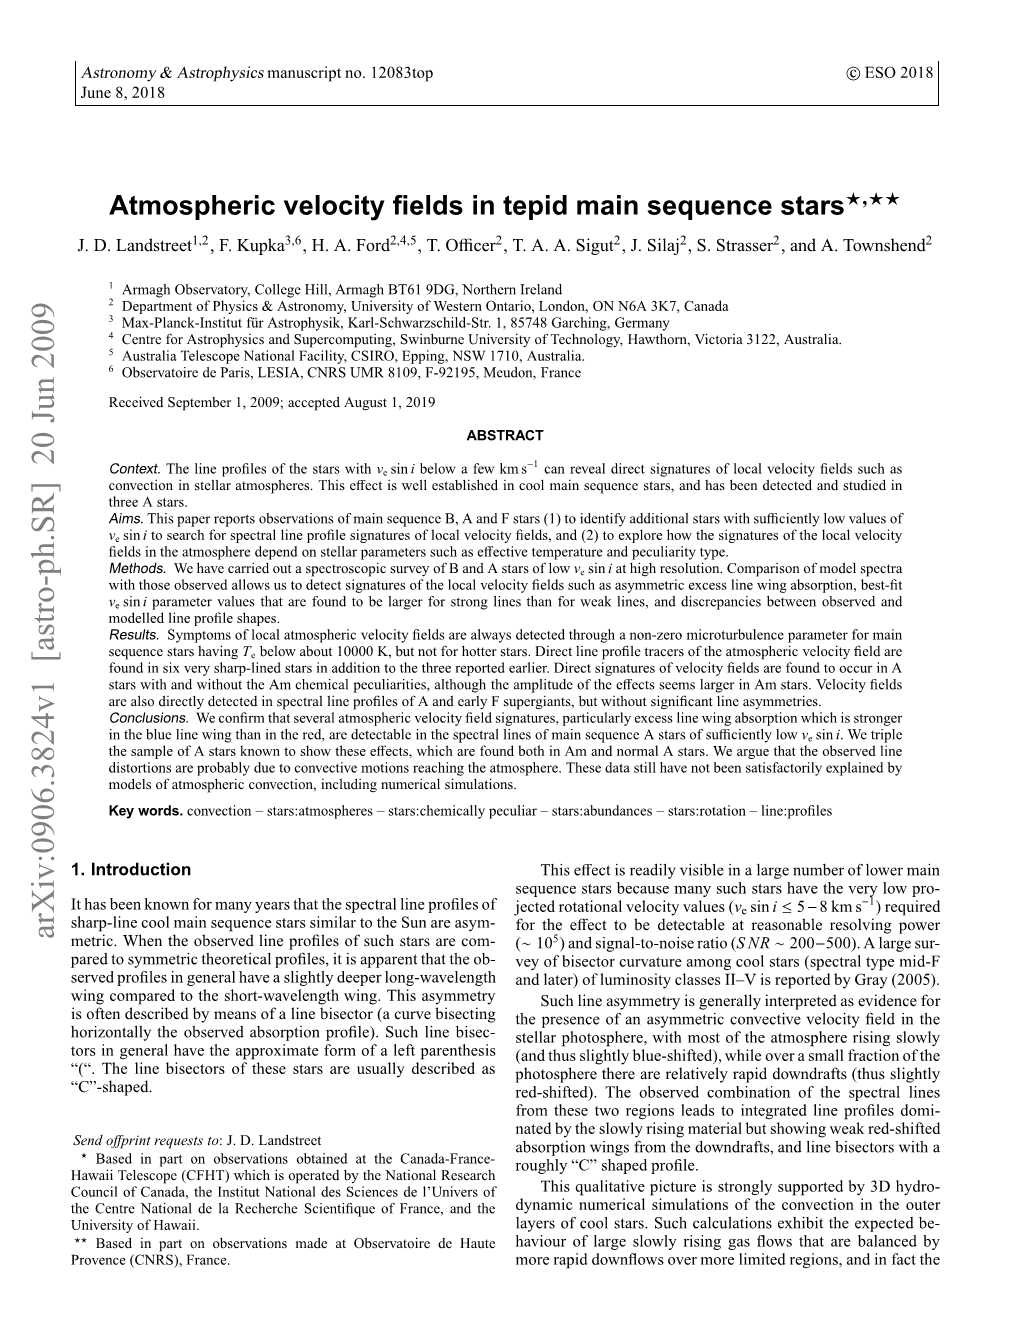 Atmospheric Velocity Fields in Tepid Main Sequence Stars